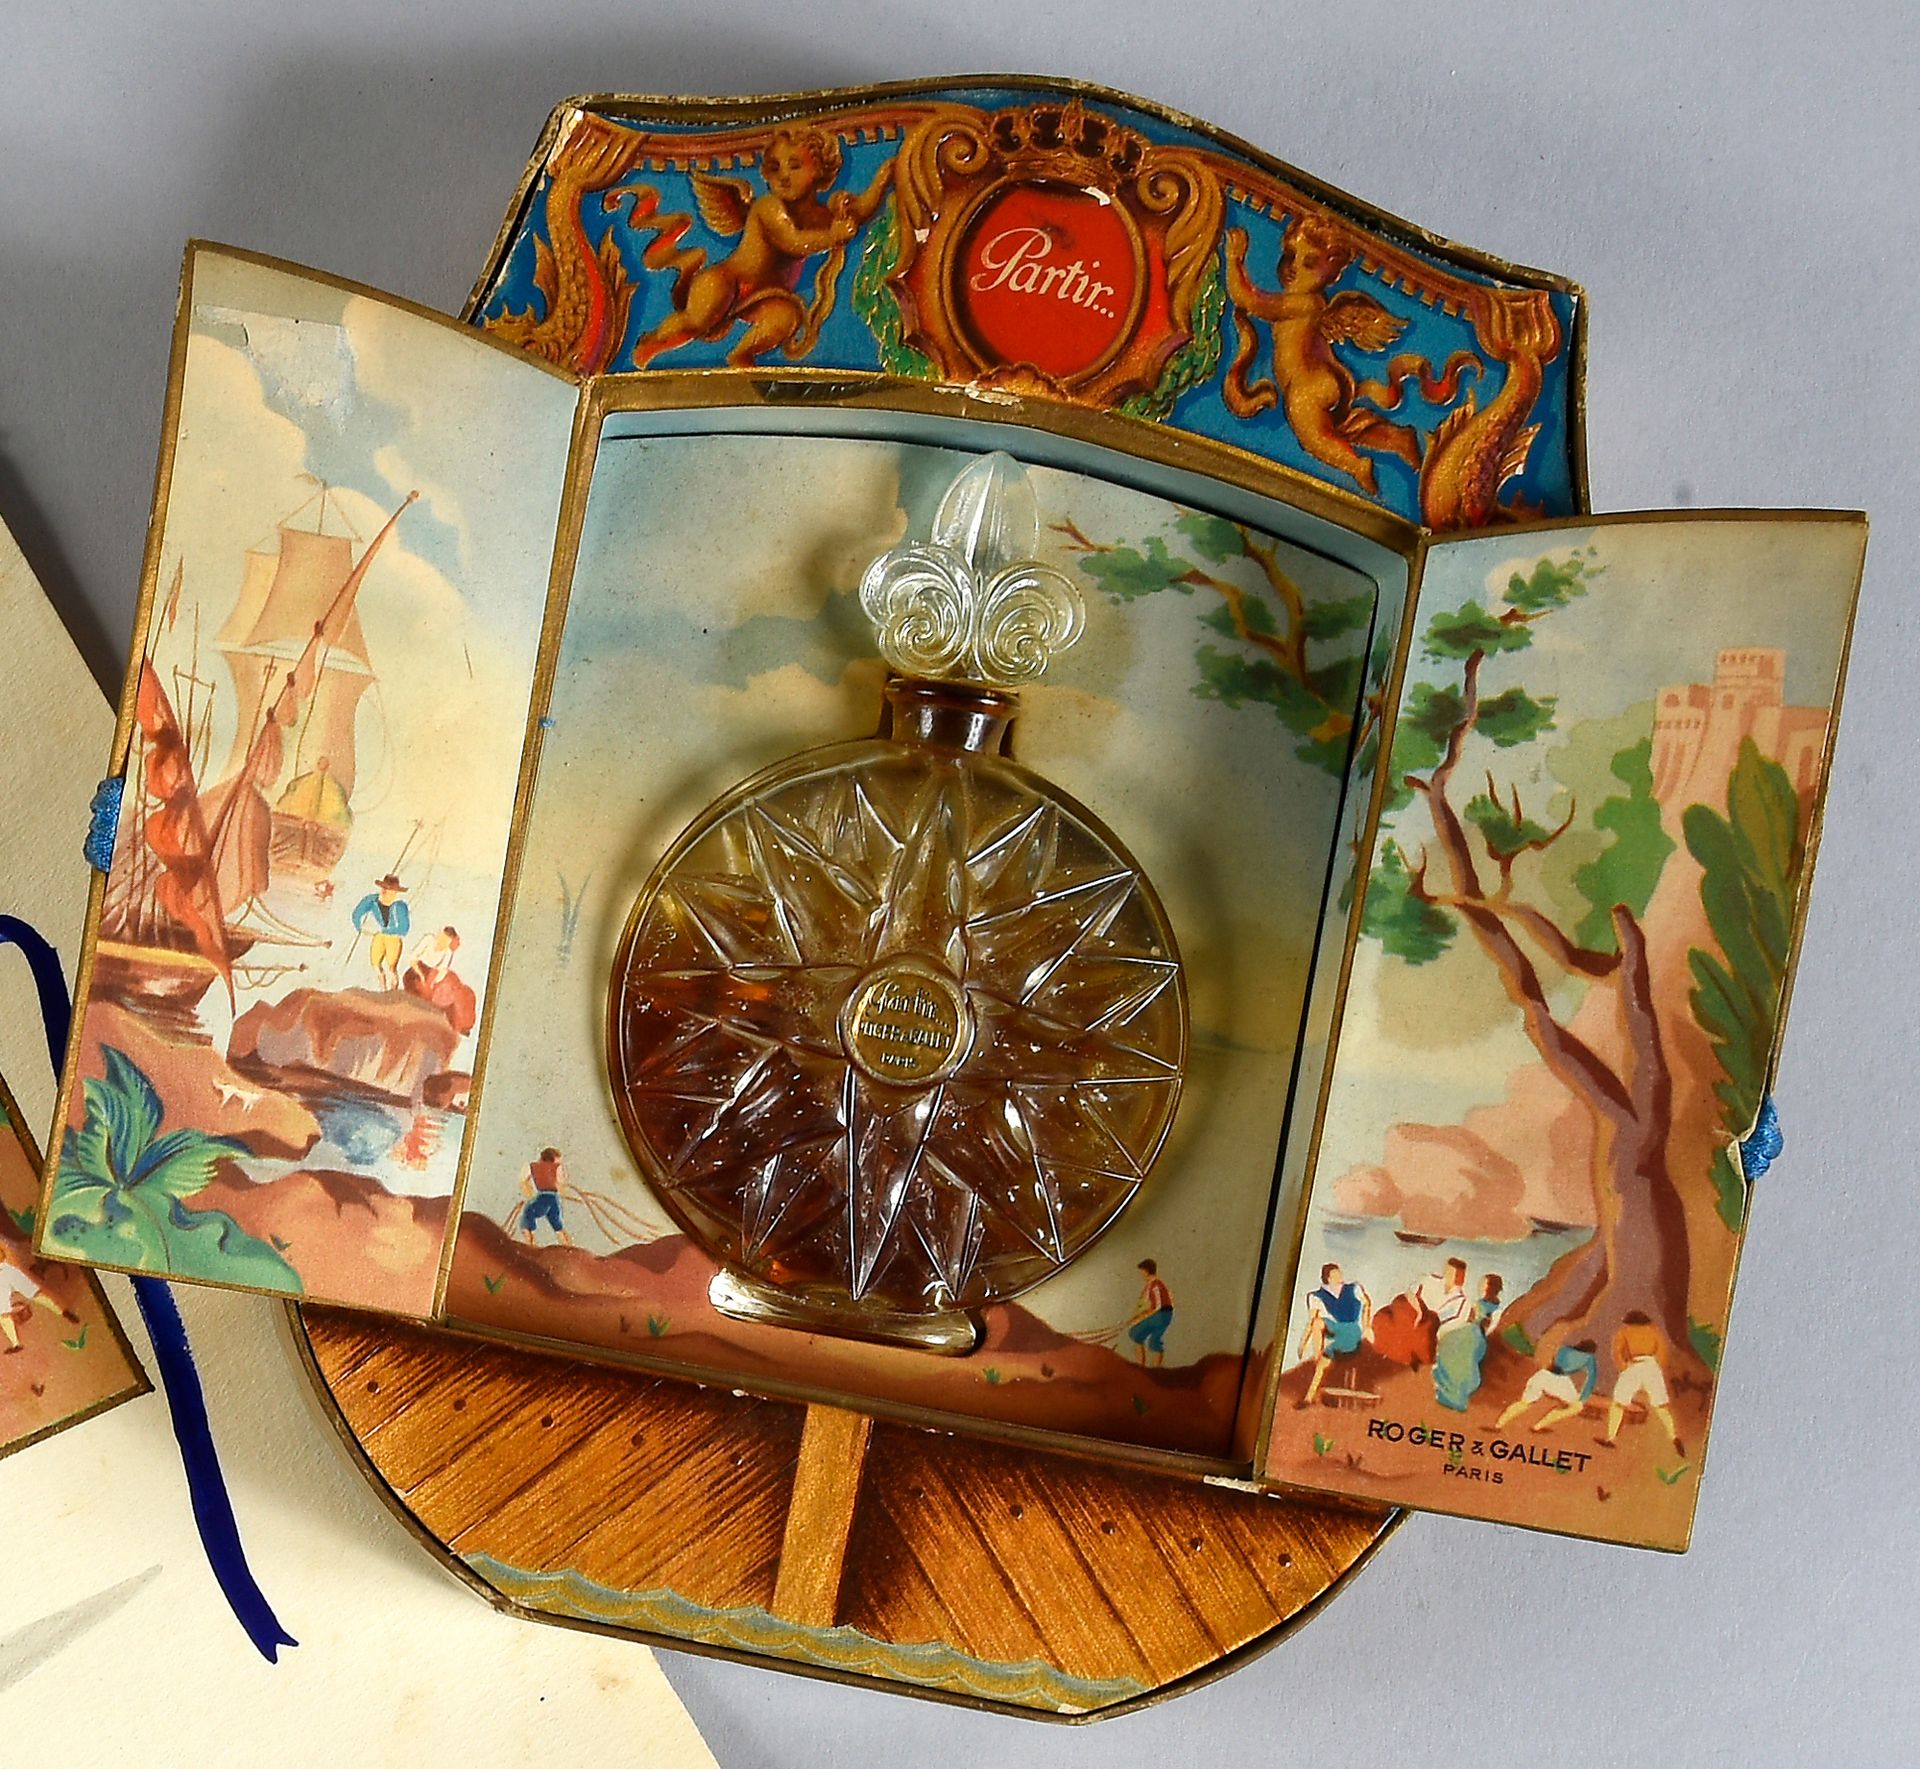 Roger & Gallet - «Partir» - (1946) 
Presented in its sumptuous cardboard box she&hellip;